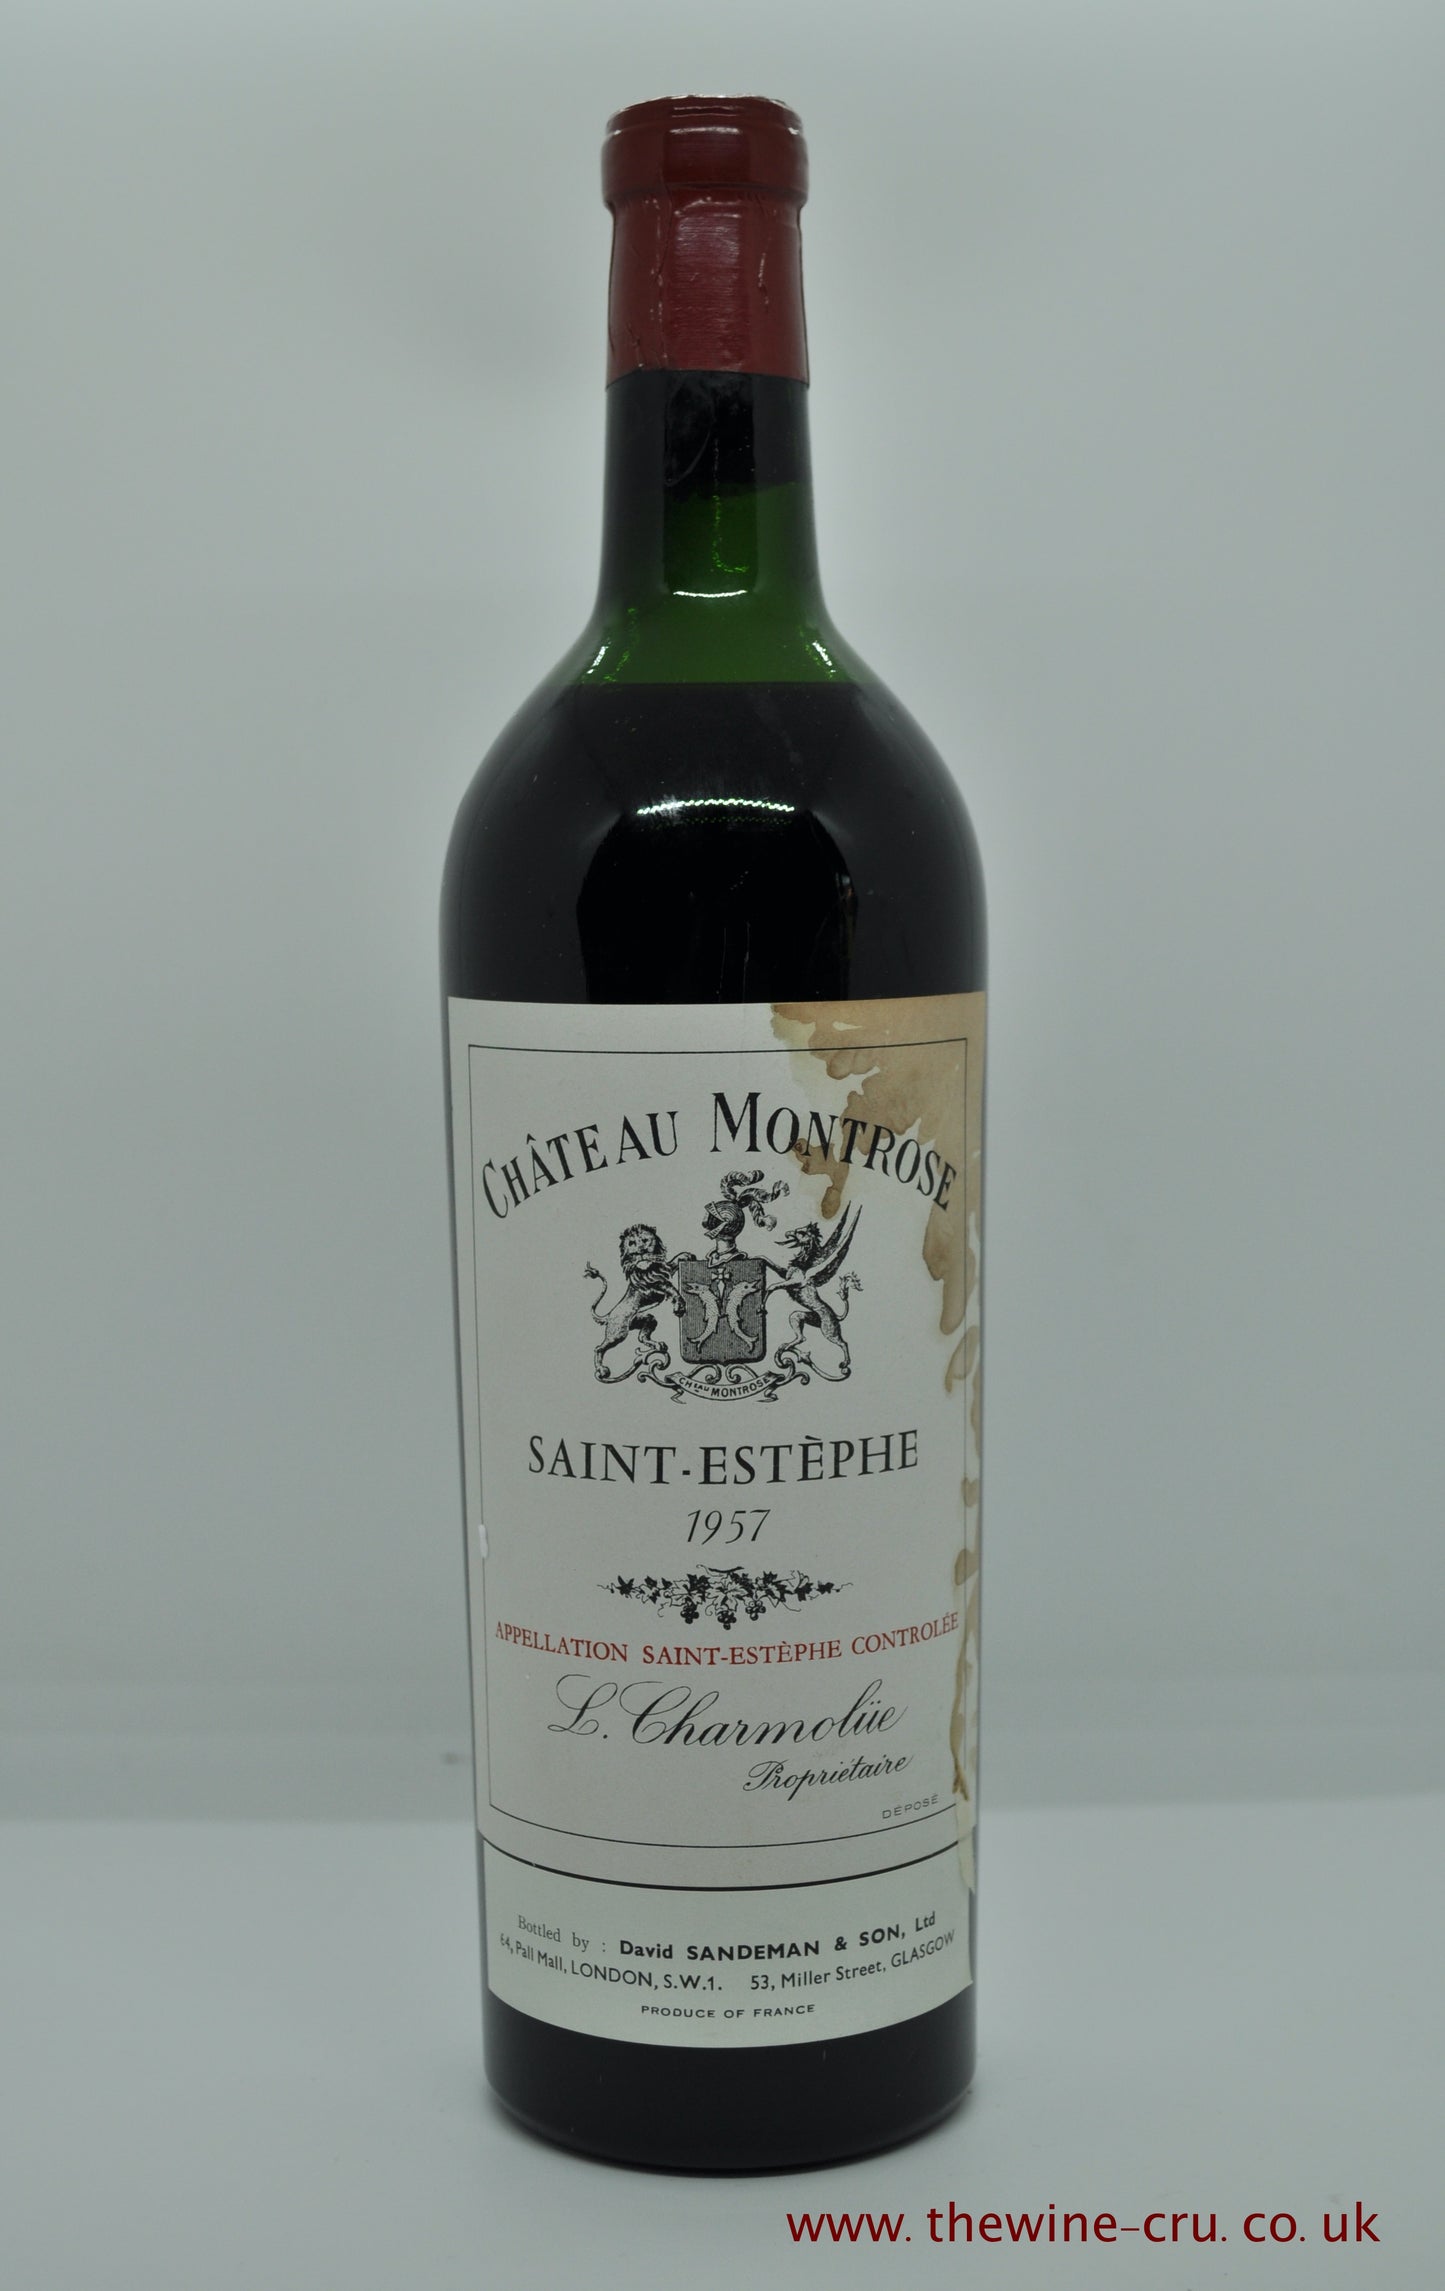 1957 vintage red wine. Chateau Montrose 1957. France Bordeaux. Immediate delivery. Free local delivery.